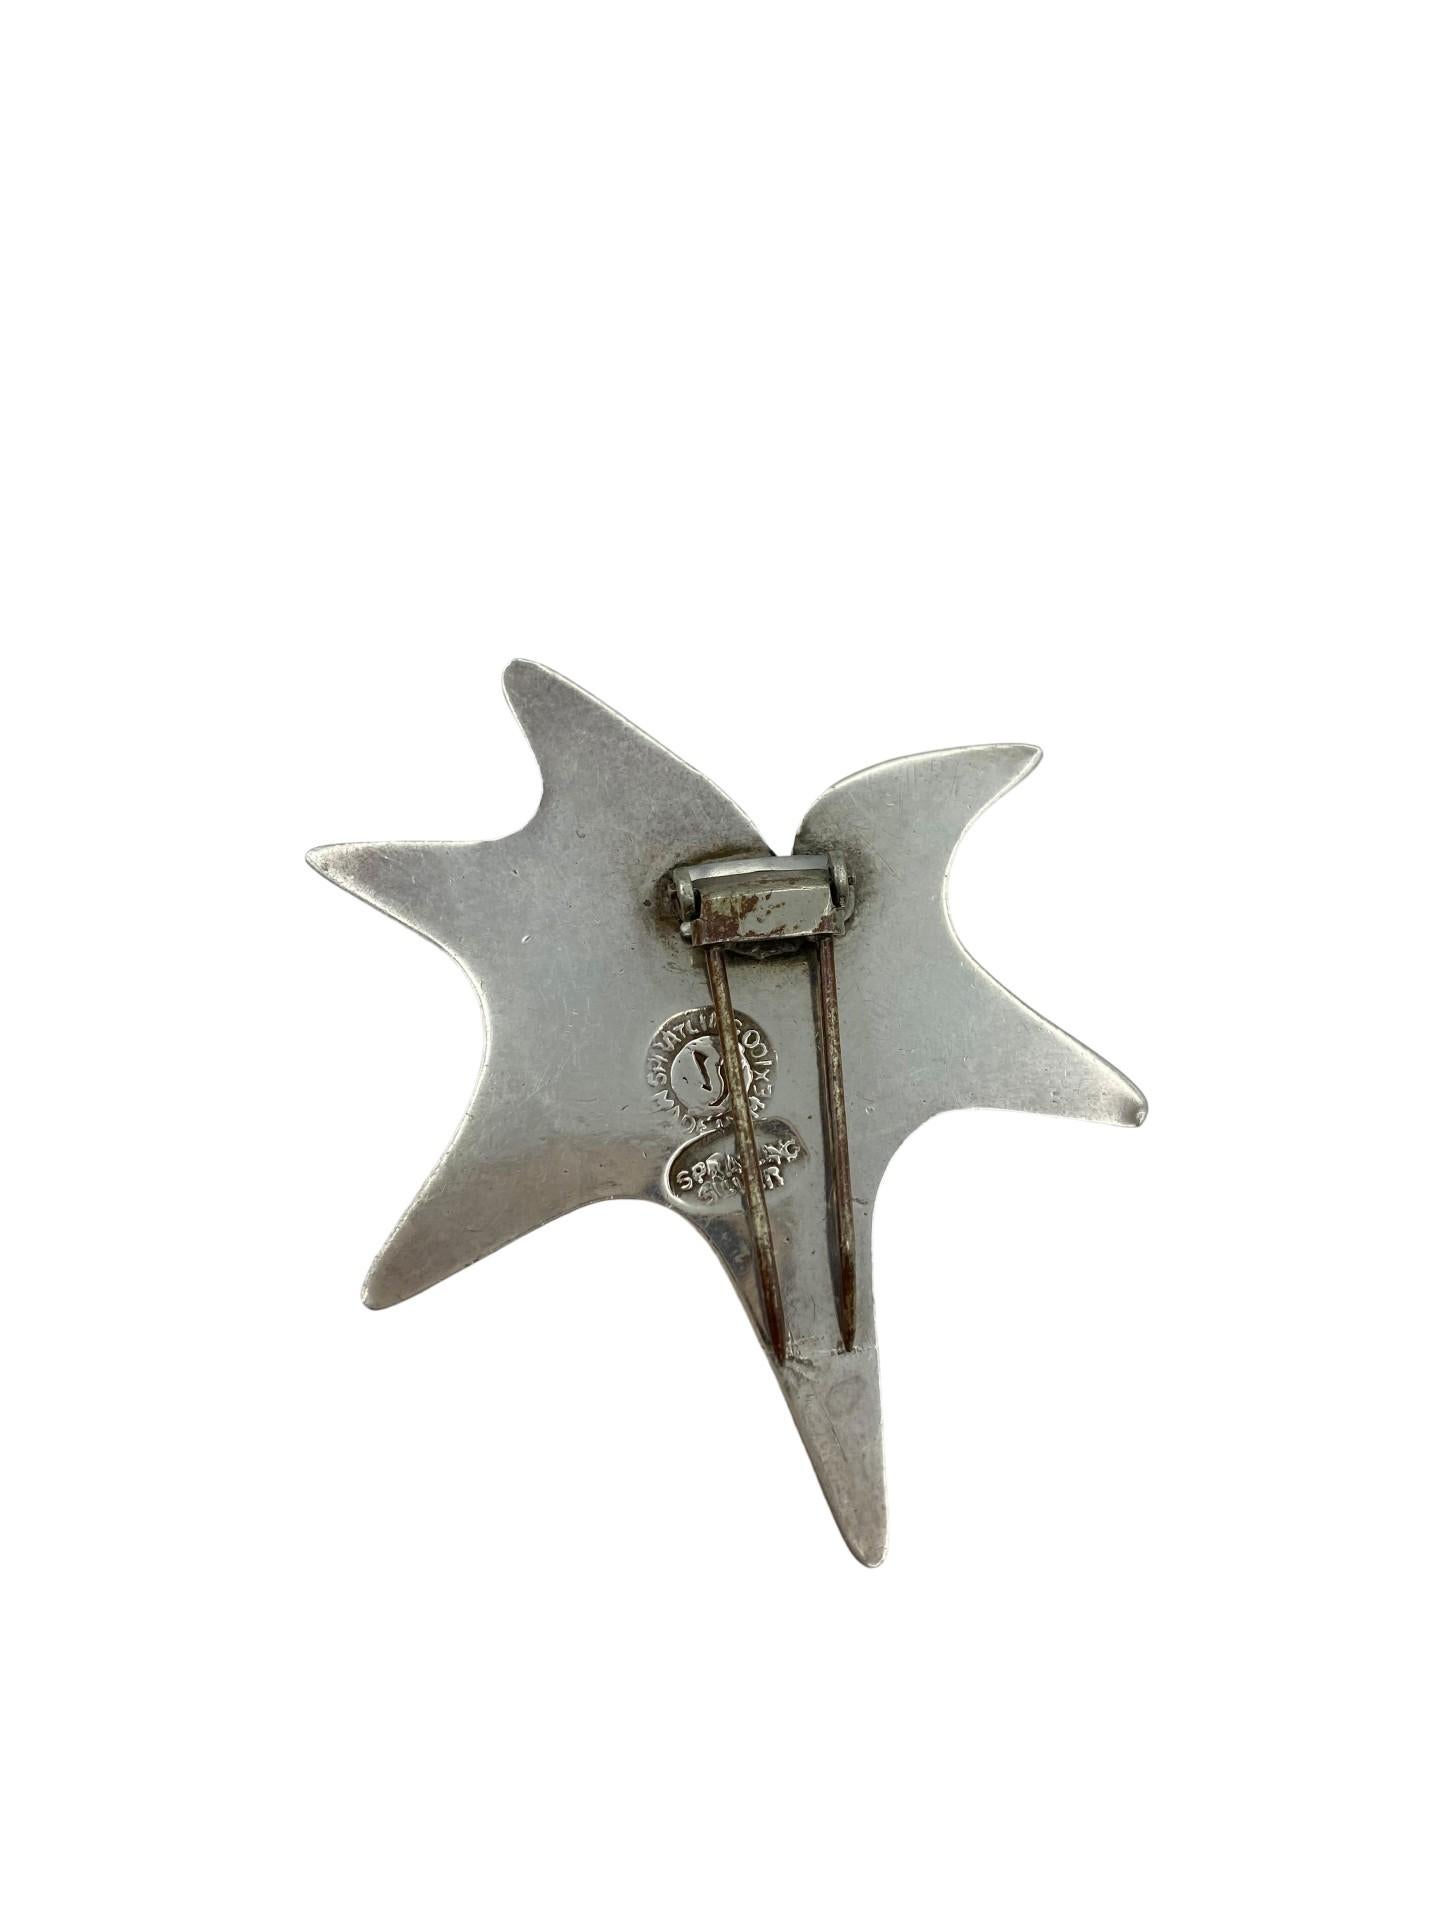 William Spratling Conch Shell Earrings Pin Brooch Set 980 Silver Vintage Taxco In Good Condition For Sale In North Attleboro, MA